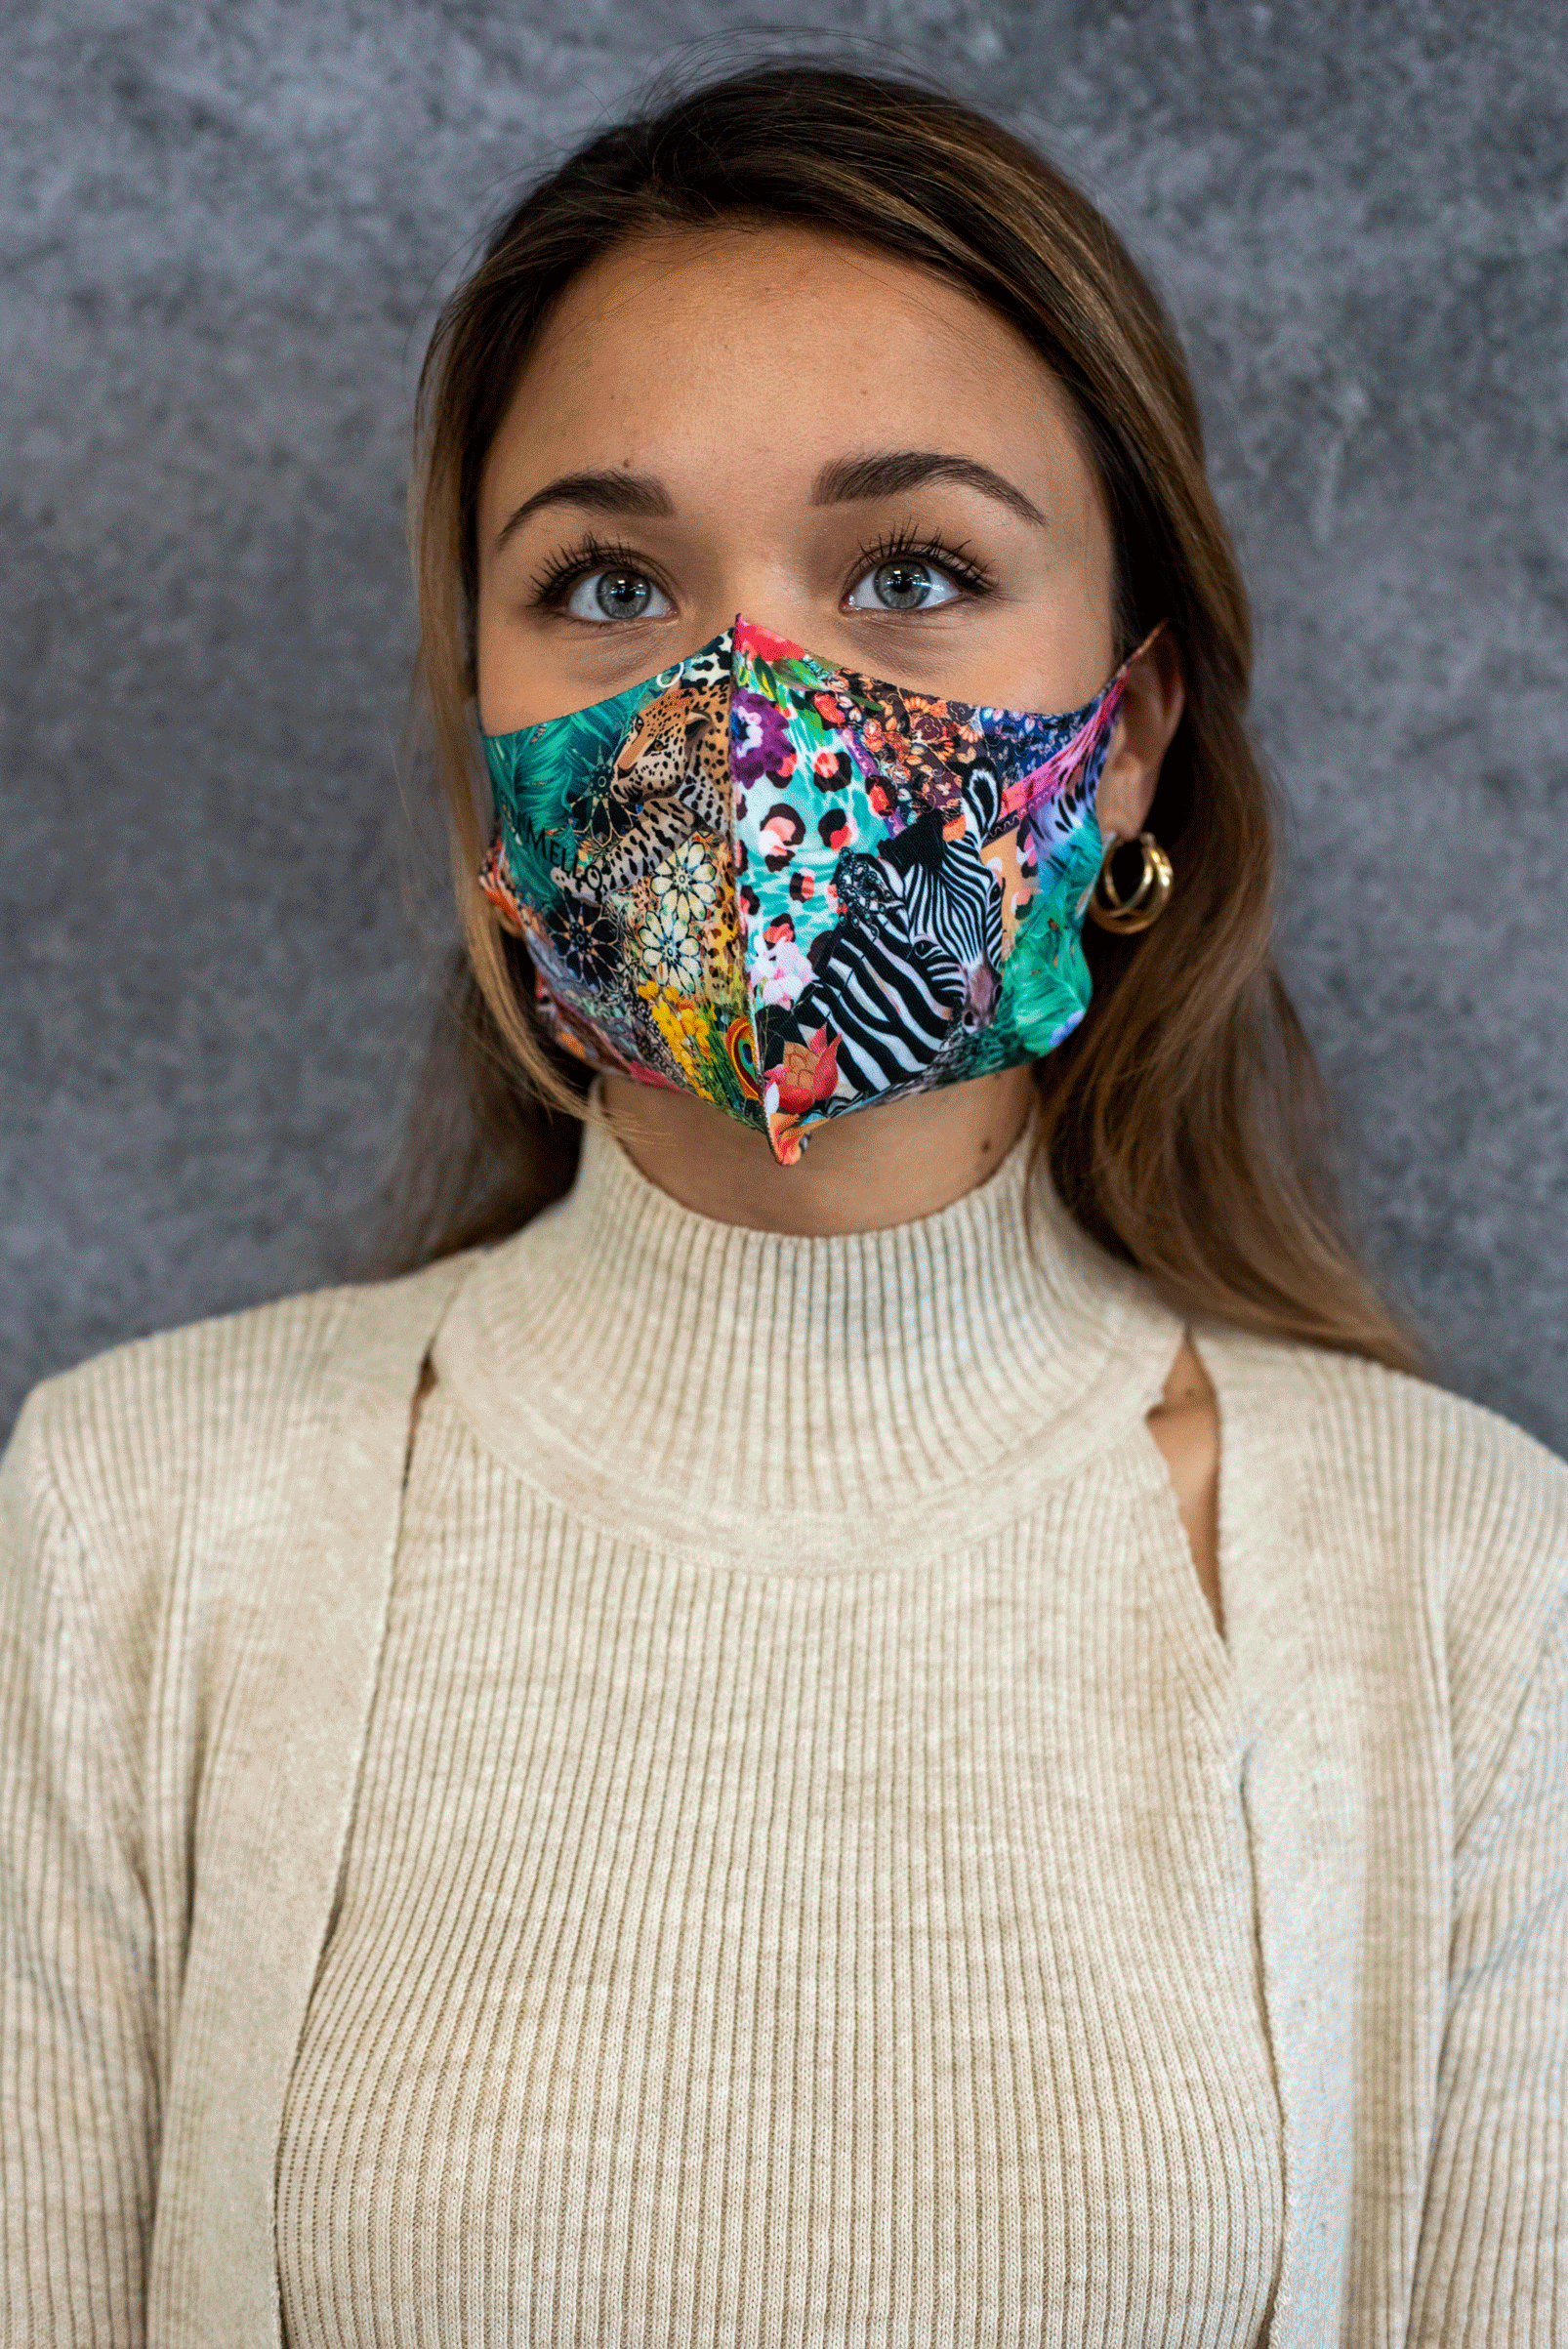 Melli Mello Zoo me jungle animal print colorful mouth mask high quality waterproof UV protection Air filtration PM2.5 anti bacterial facemask with air filtration 180 view